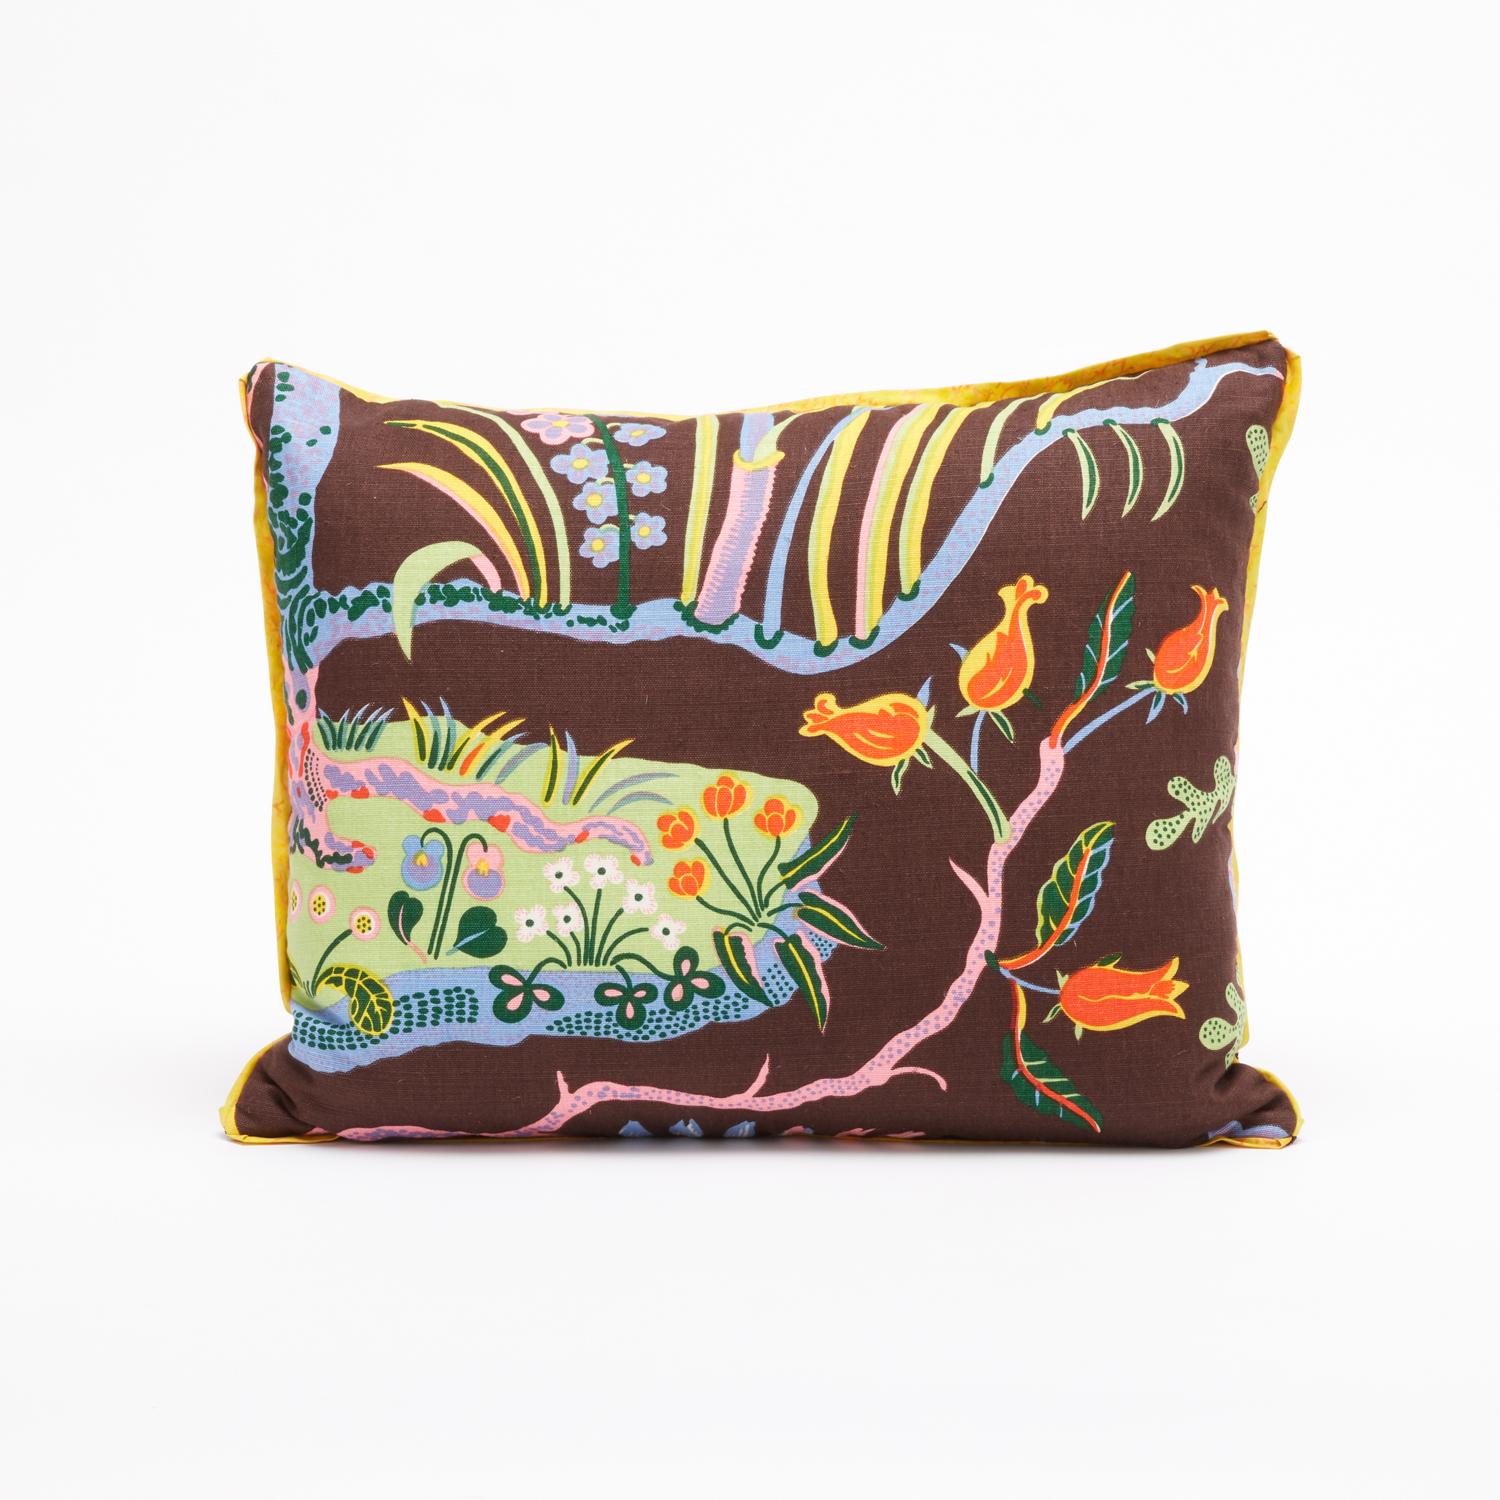 A set of two rectangular cushions featuring vintage fabric by Austrian designer Josef Frank. Each cushion displays a design motif from Josef Frank's 